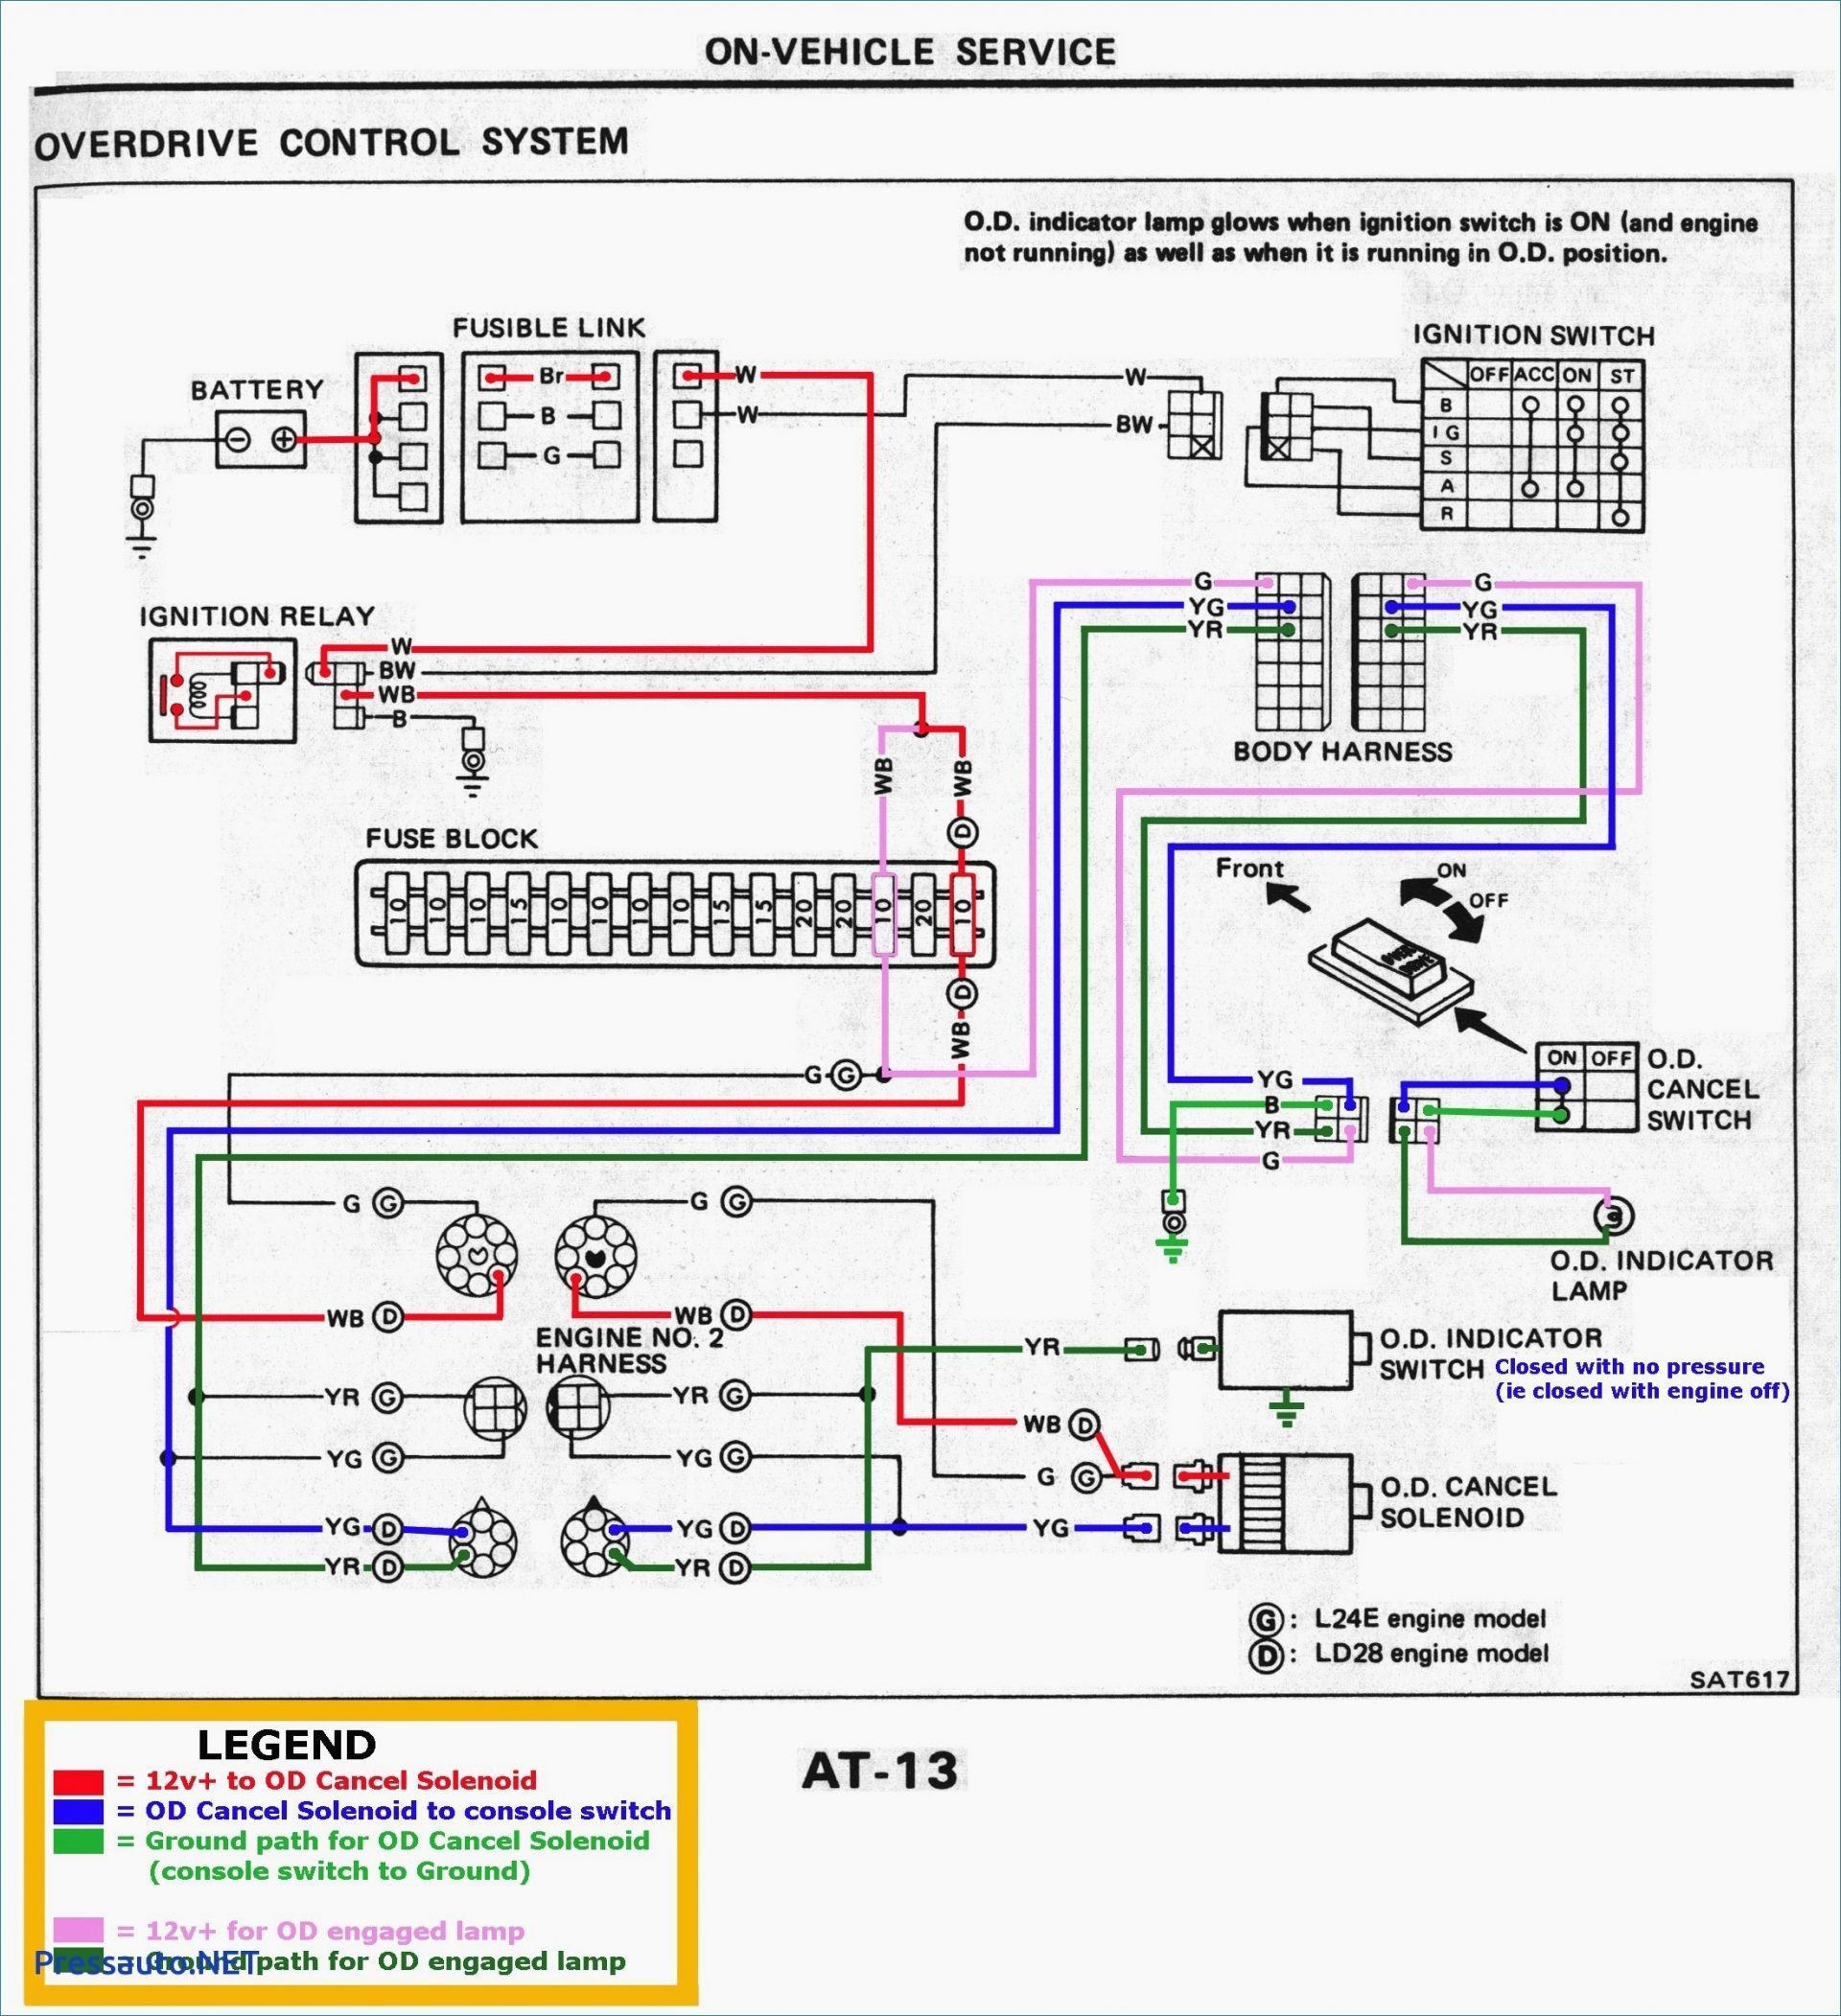 Wiring Diagram For Tail Lights New Wiring Diagram For Remote Car Starter Refrence Led Tail Lights